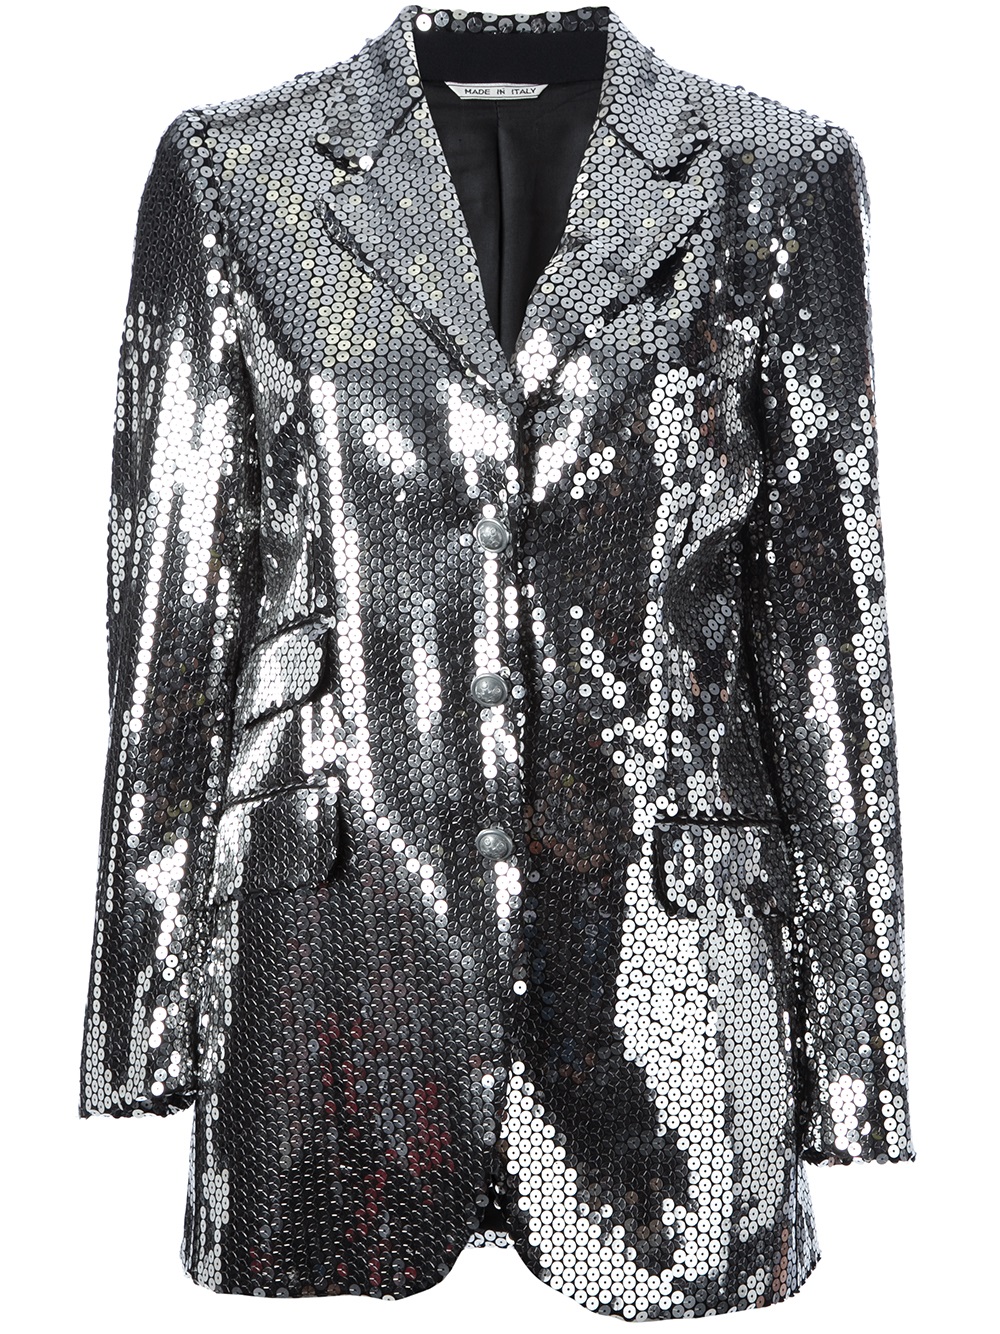 Moschino Sequined Jacket in Silver | Lyst